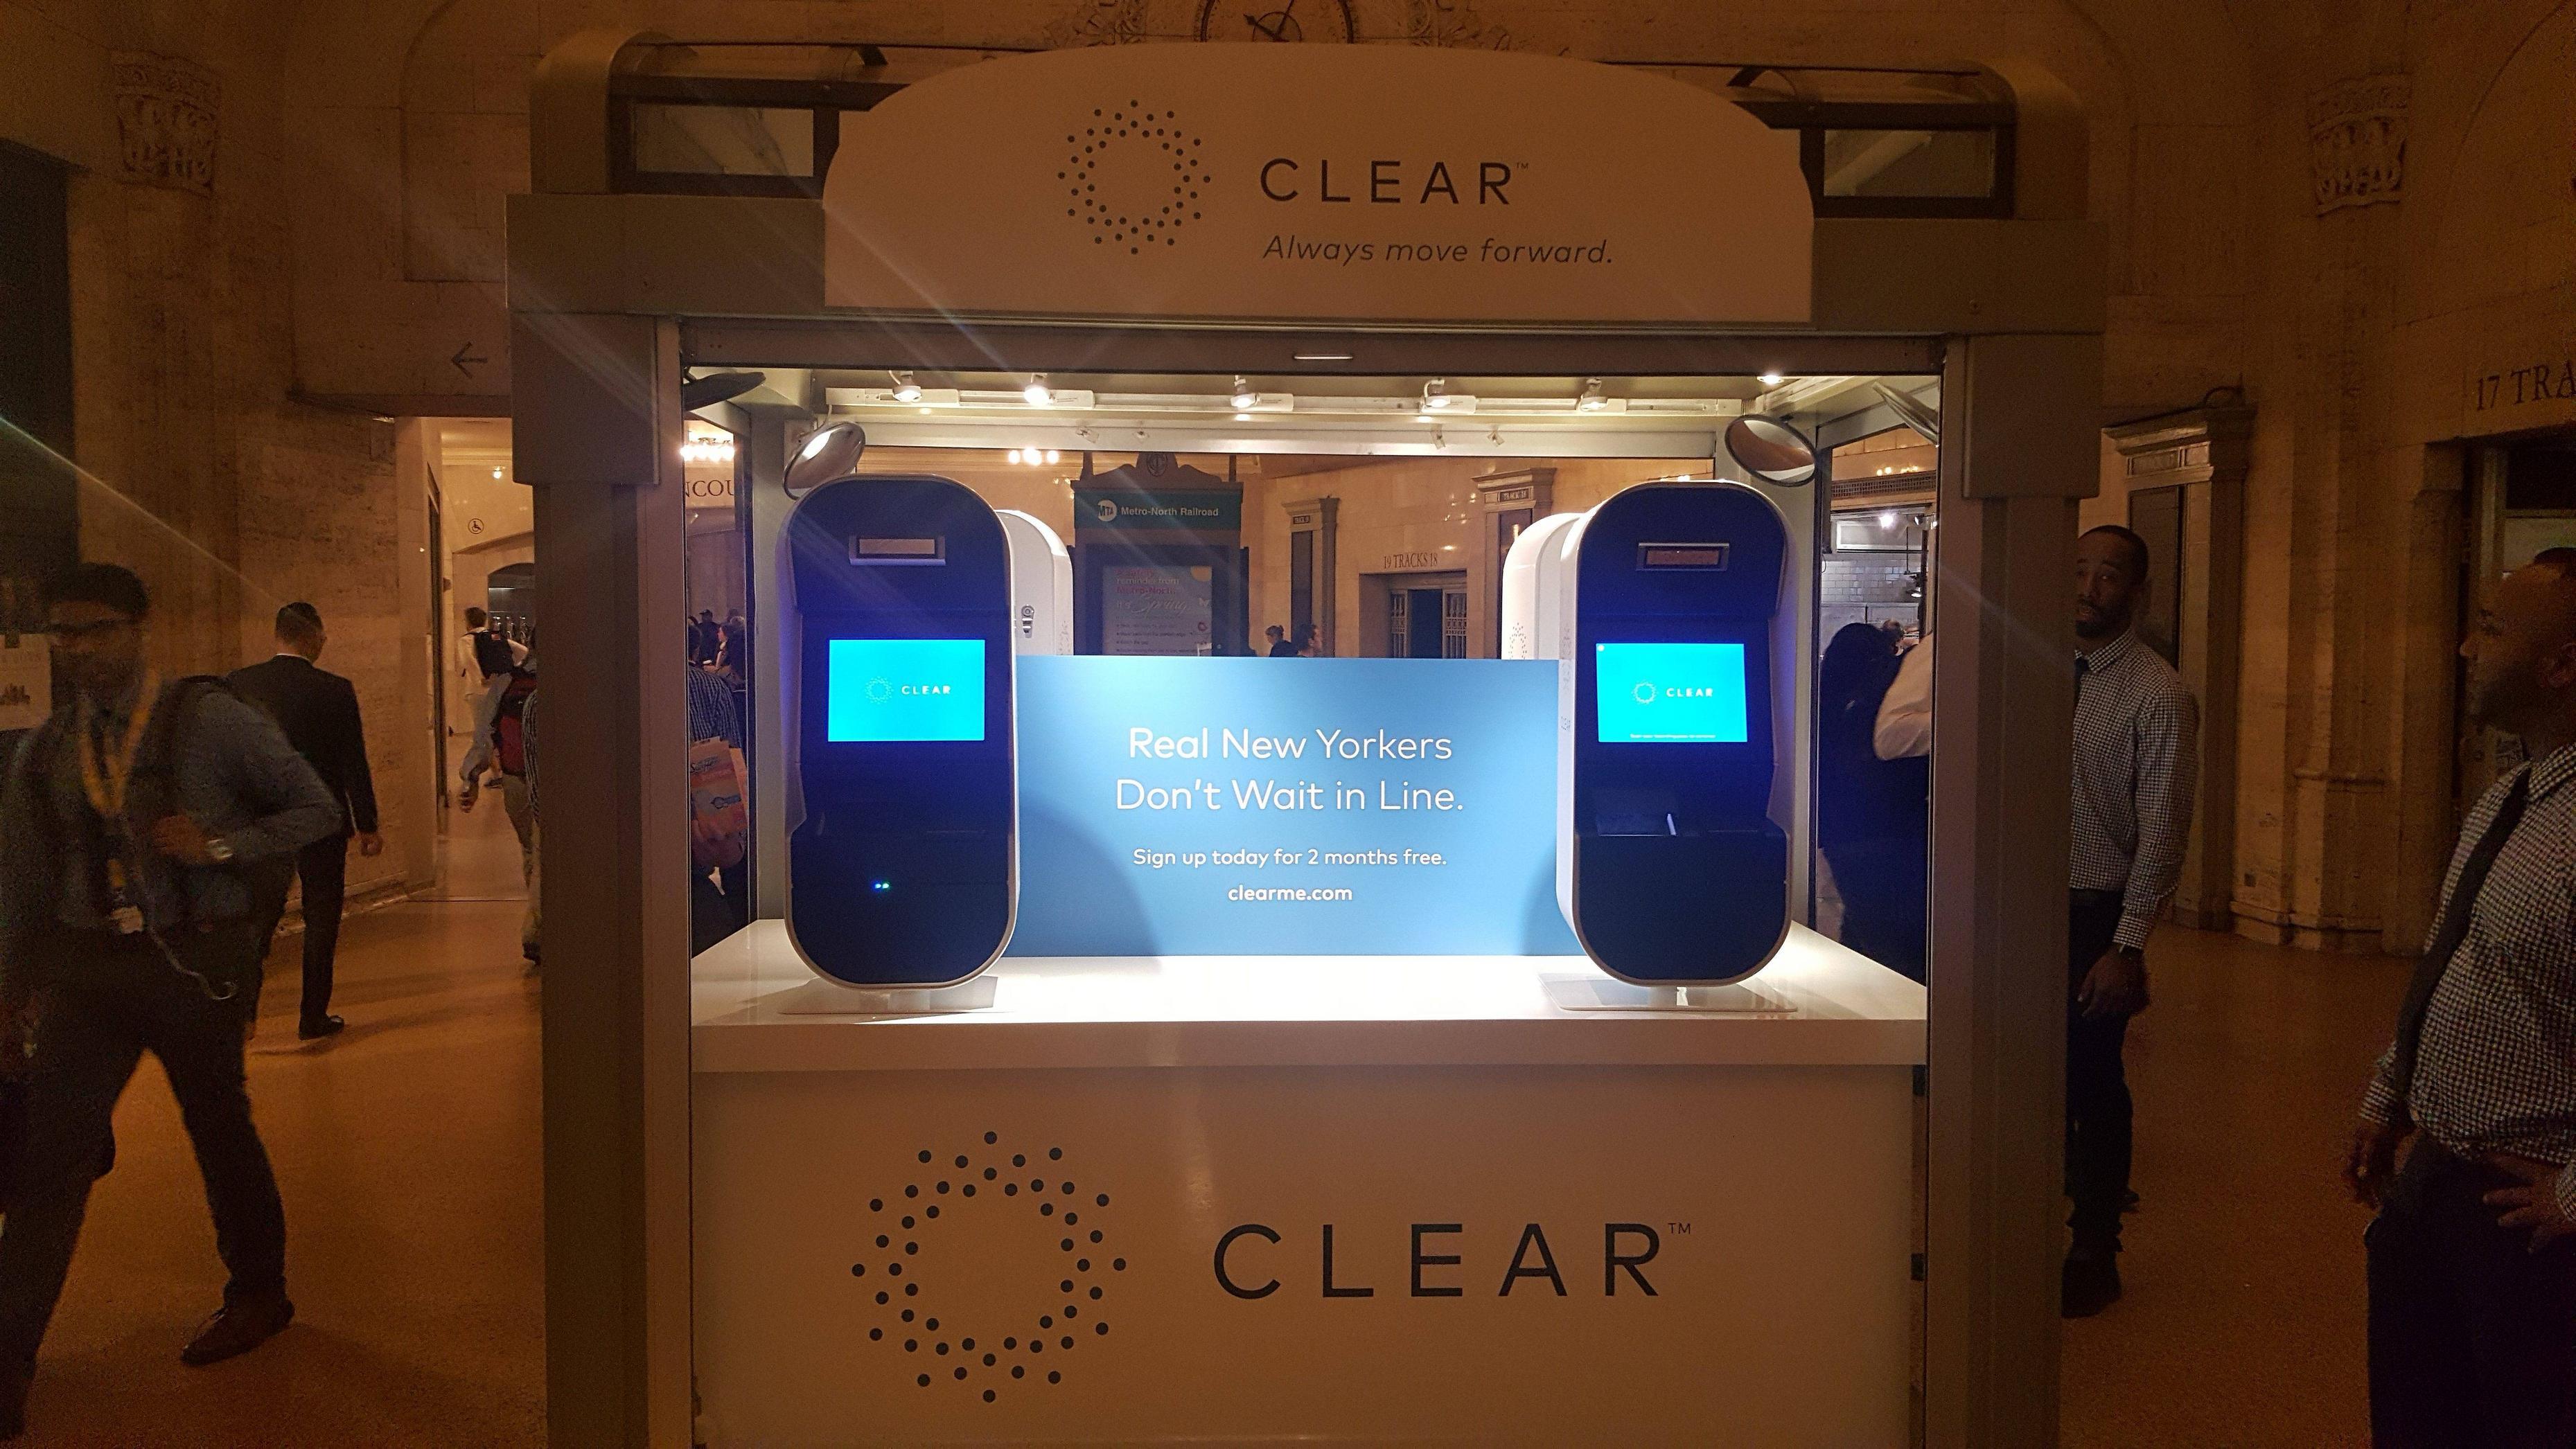 Clear Me Logo - Real New Yorkers don't wait in an airport line, according to Clear